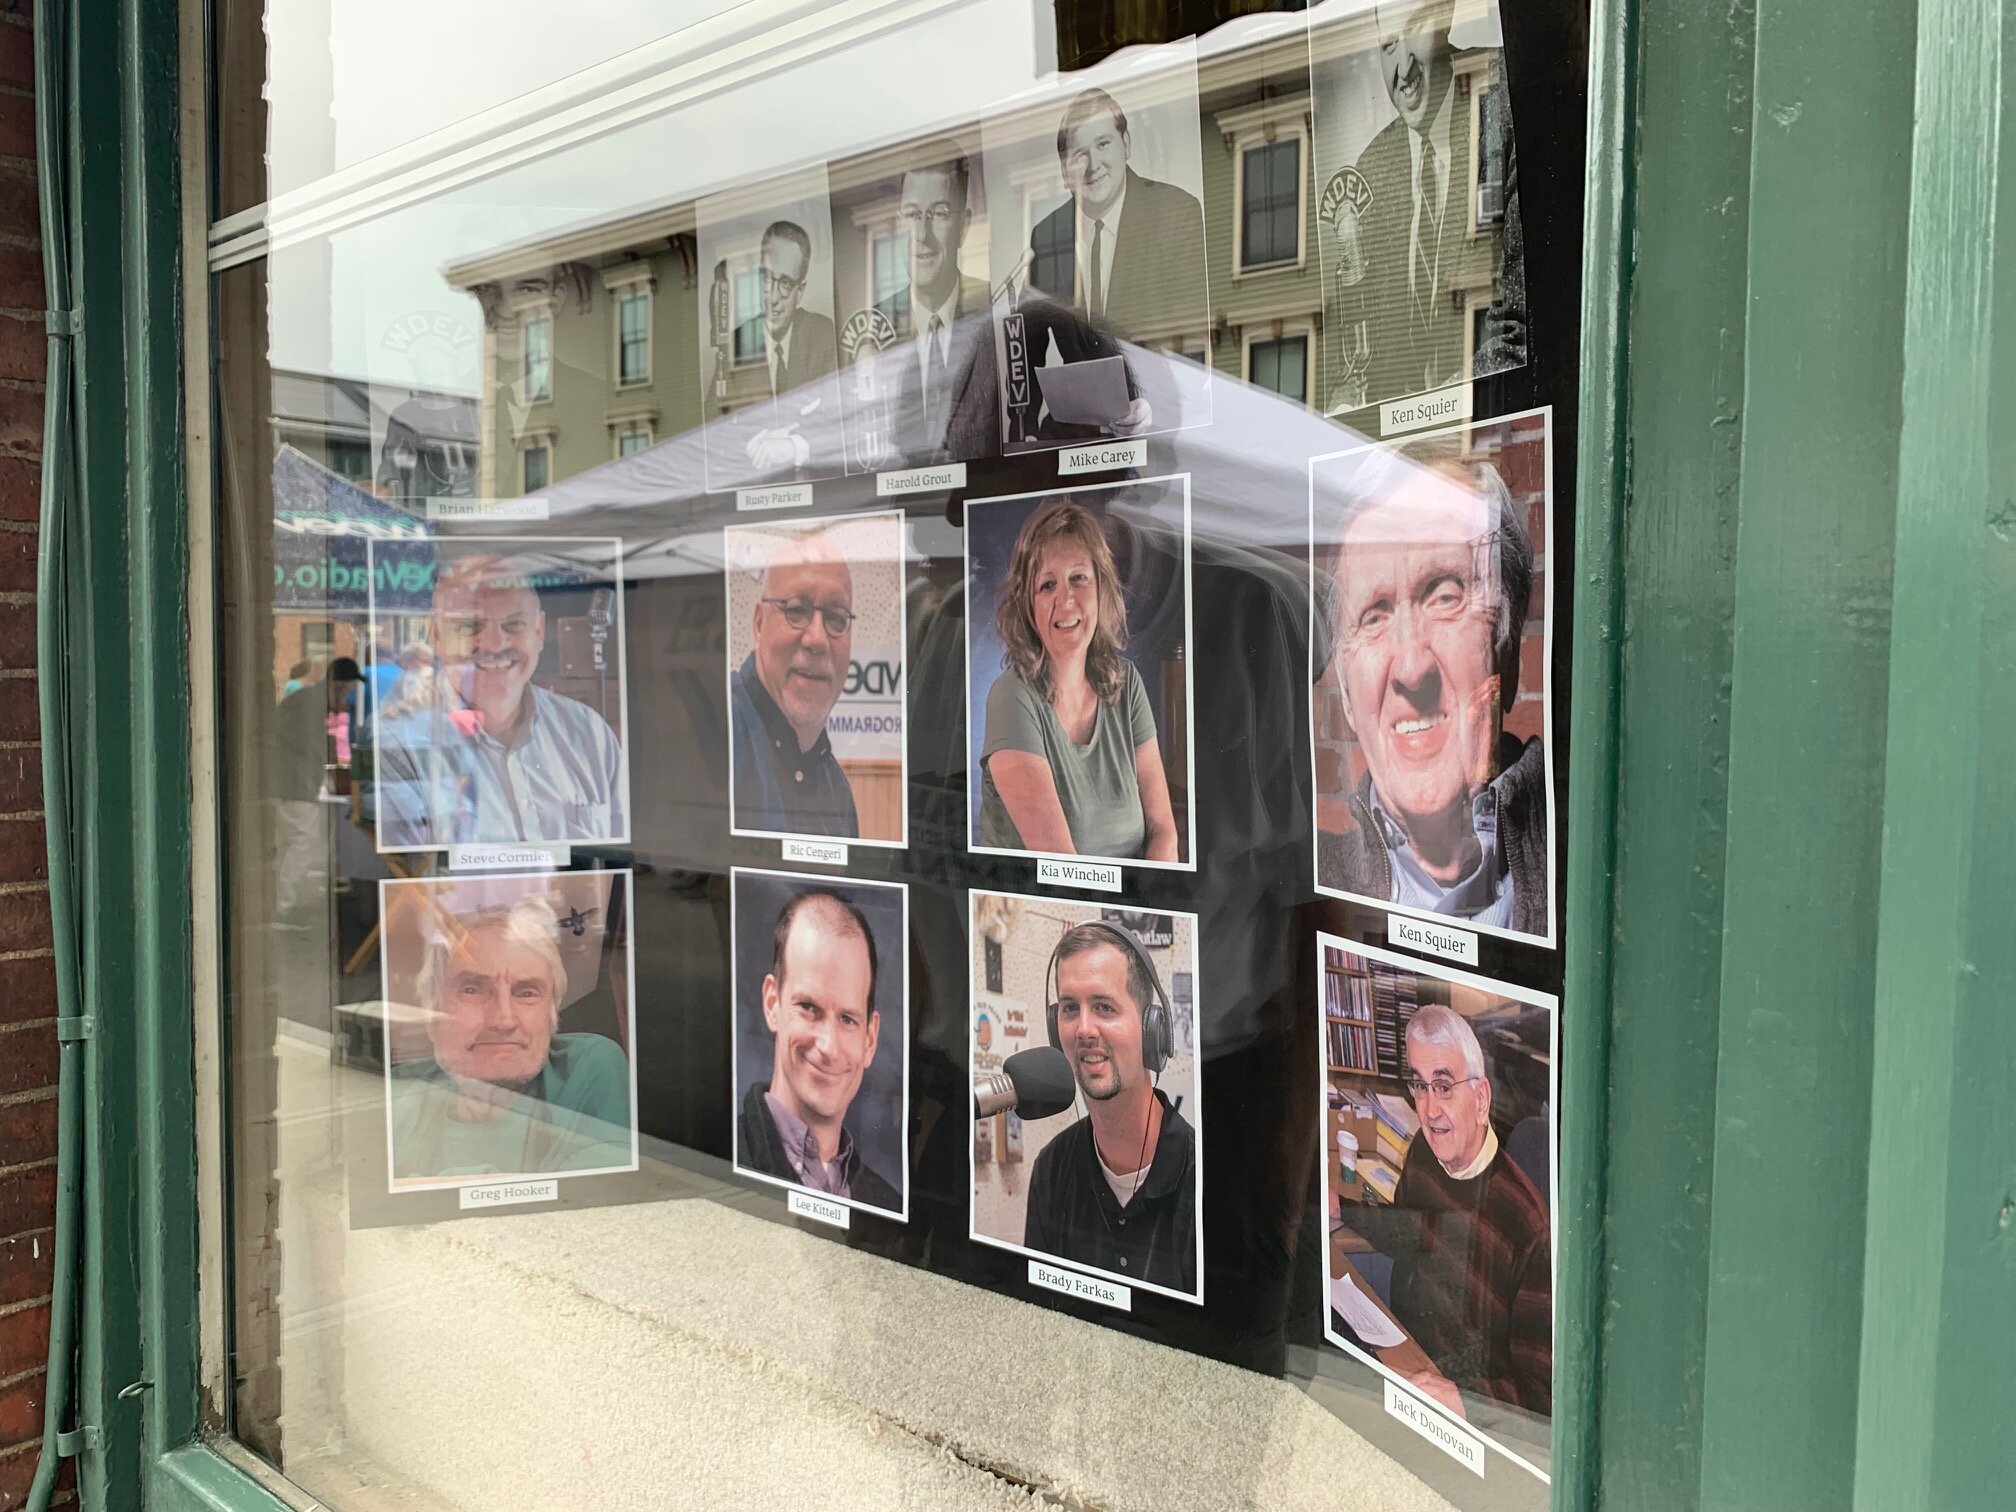   The WDEV storefront window tells its stories in portraits of past and present hosts. Photo by Lisa Scagliotti  